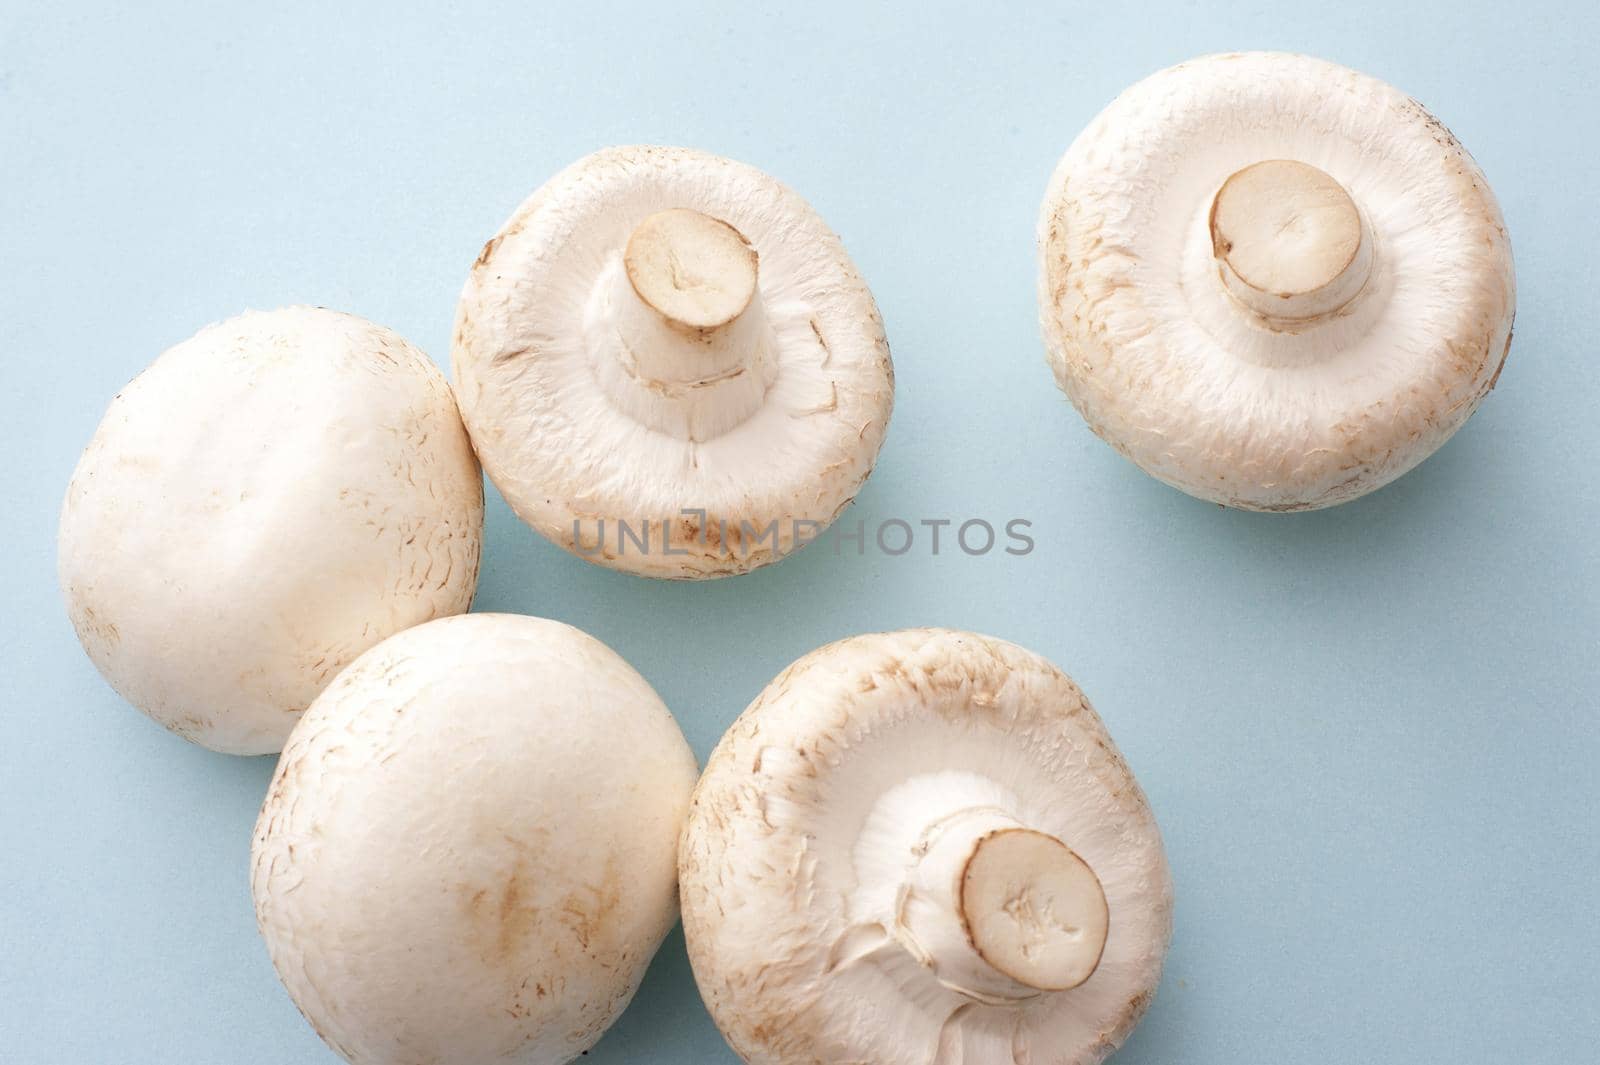 Five white mushrooms on blue background